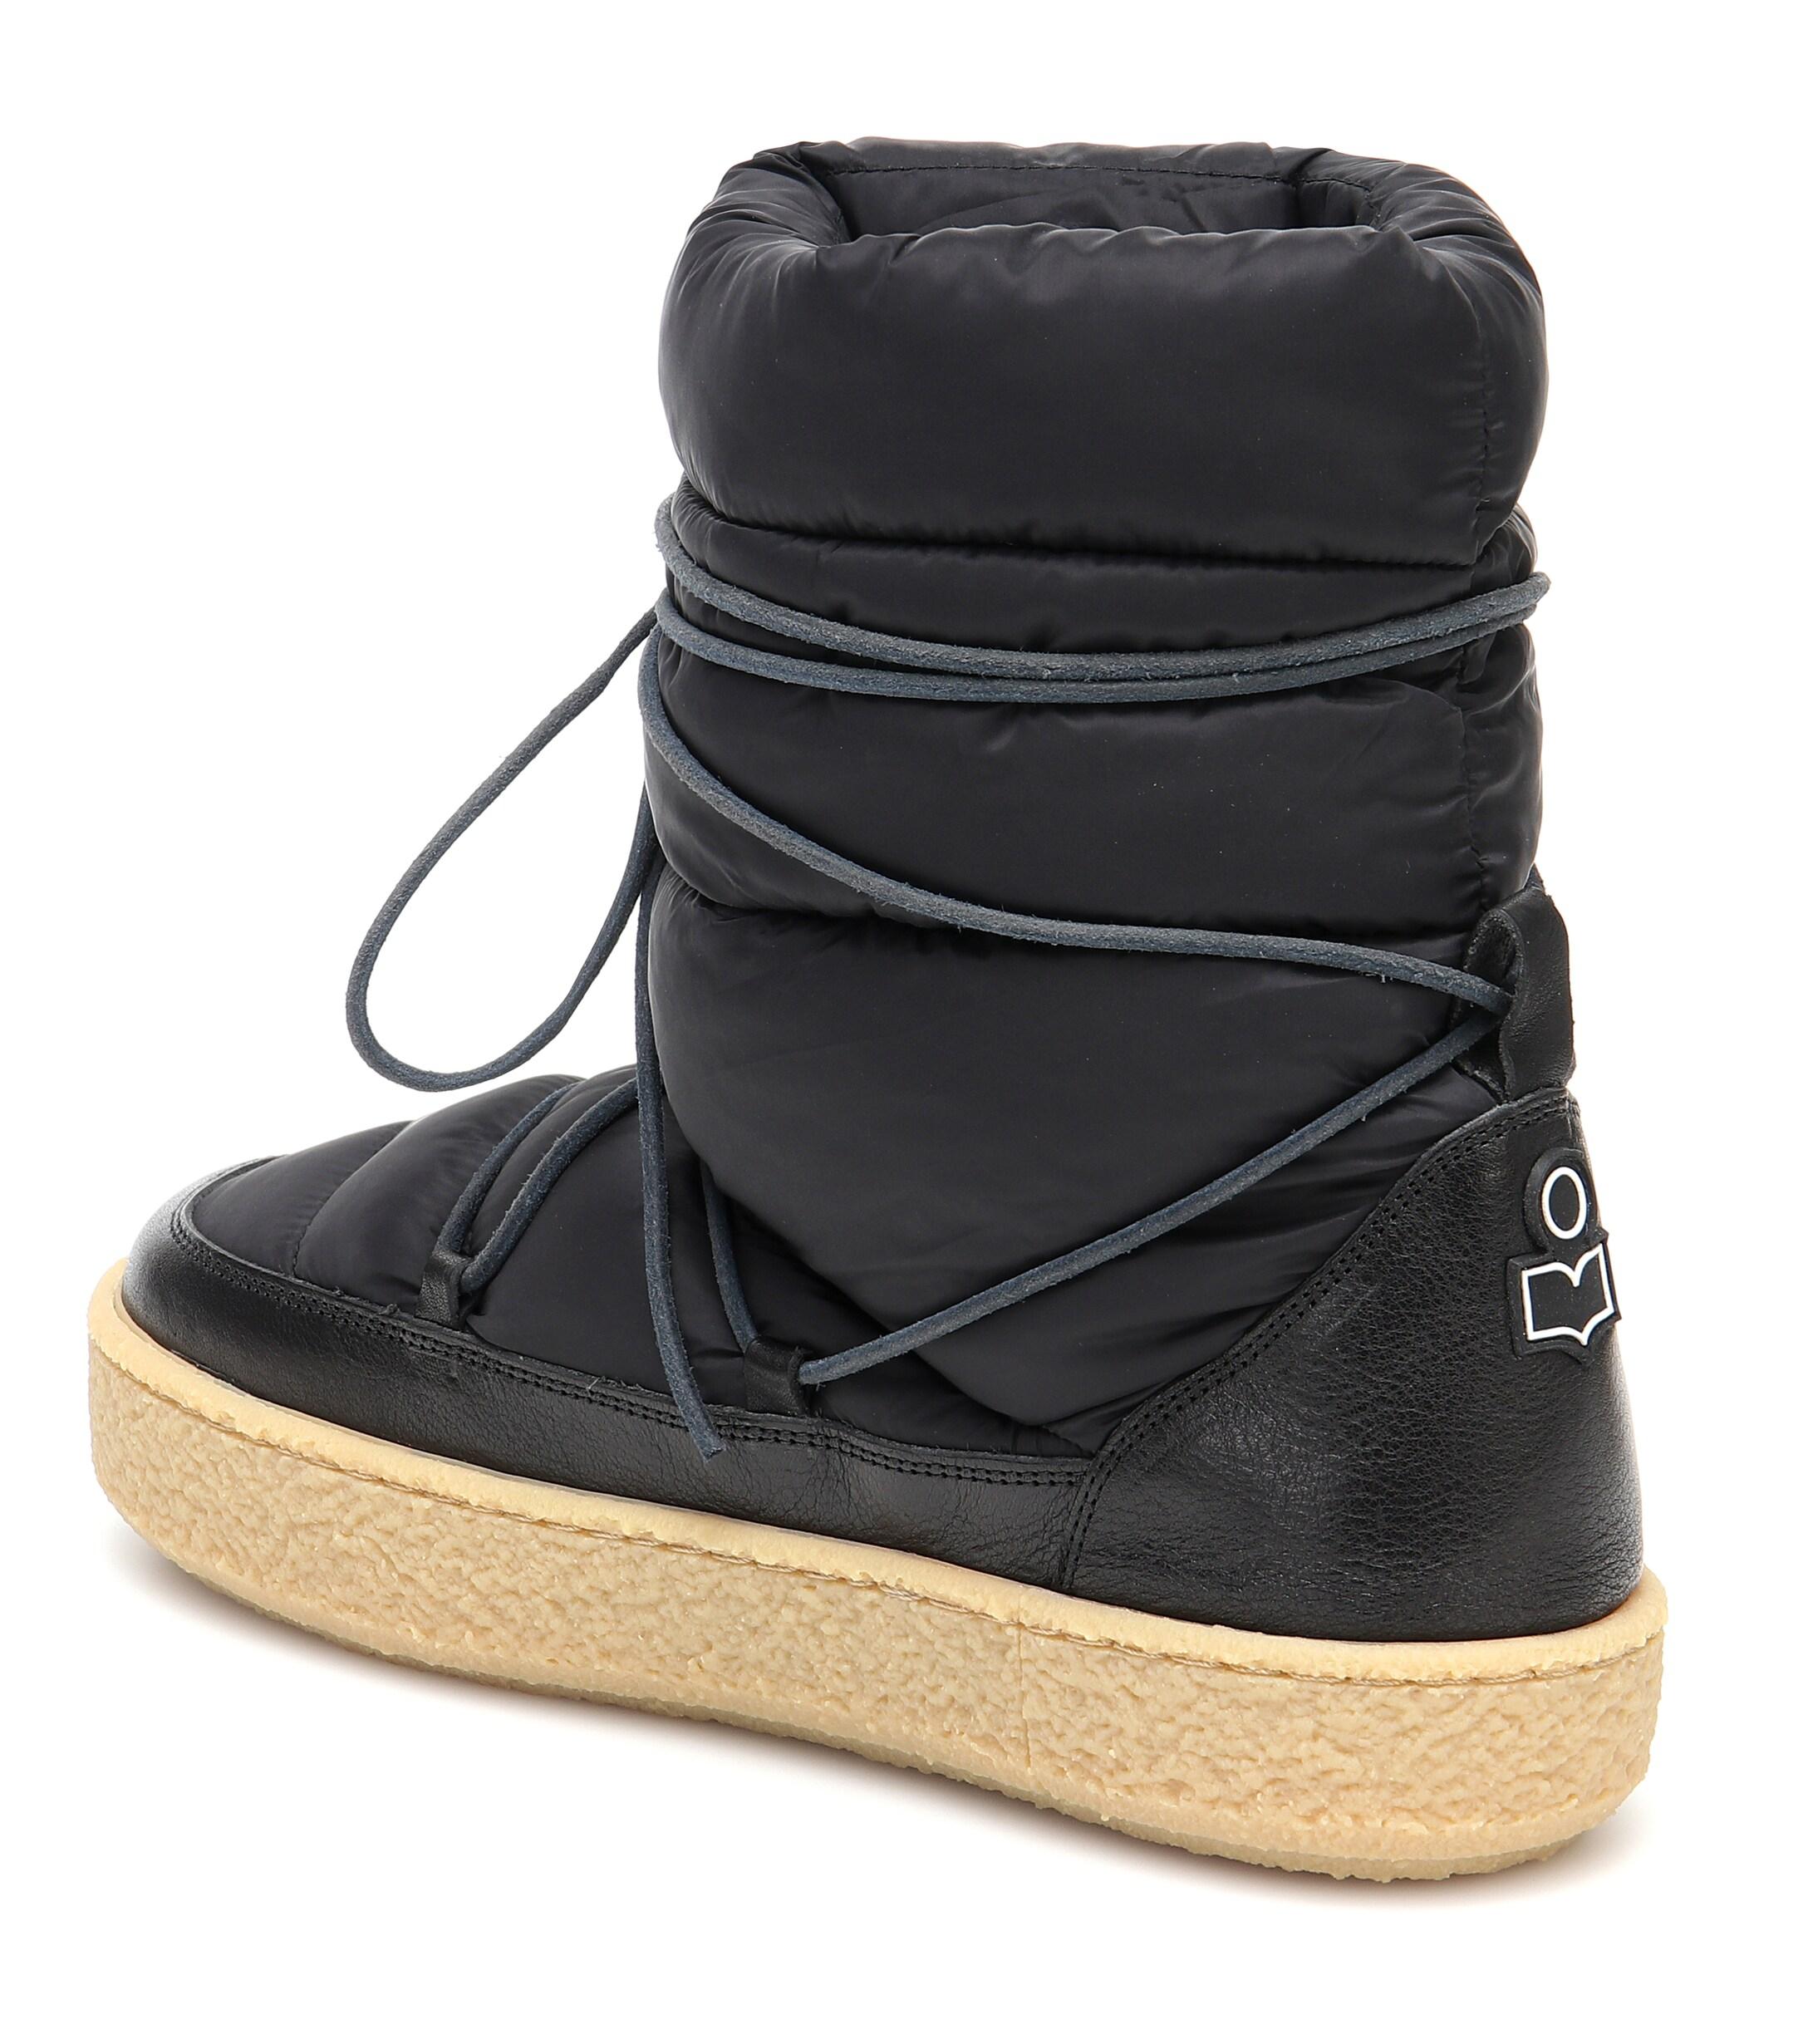 Isabel Marant Zimlee Padded Snow Boots in Black | Lyst